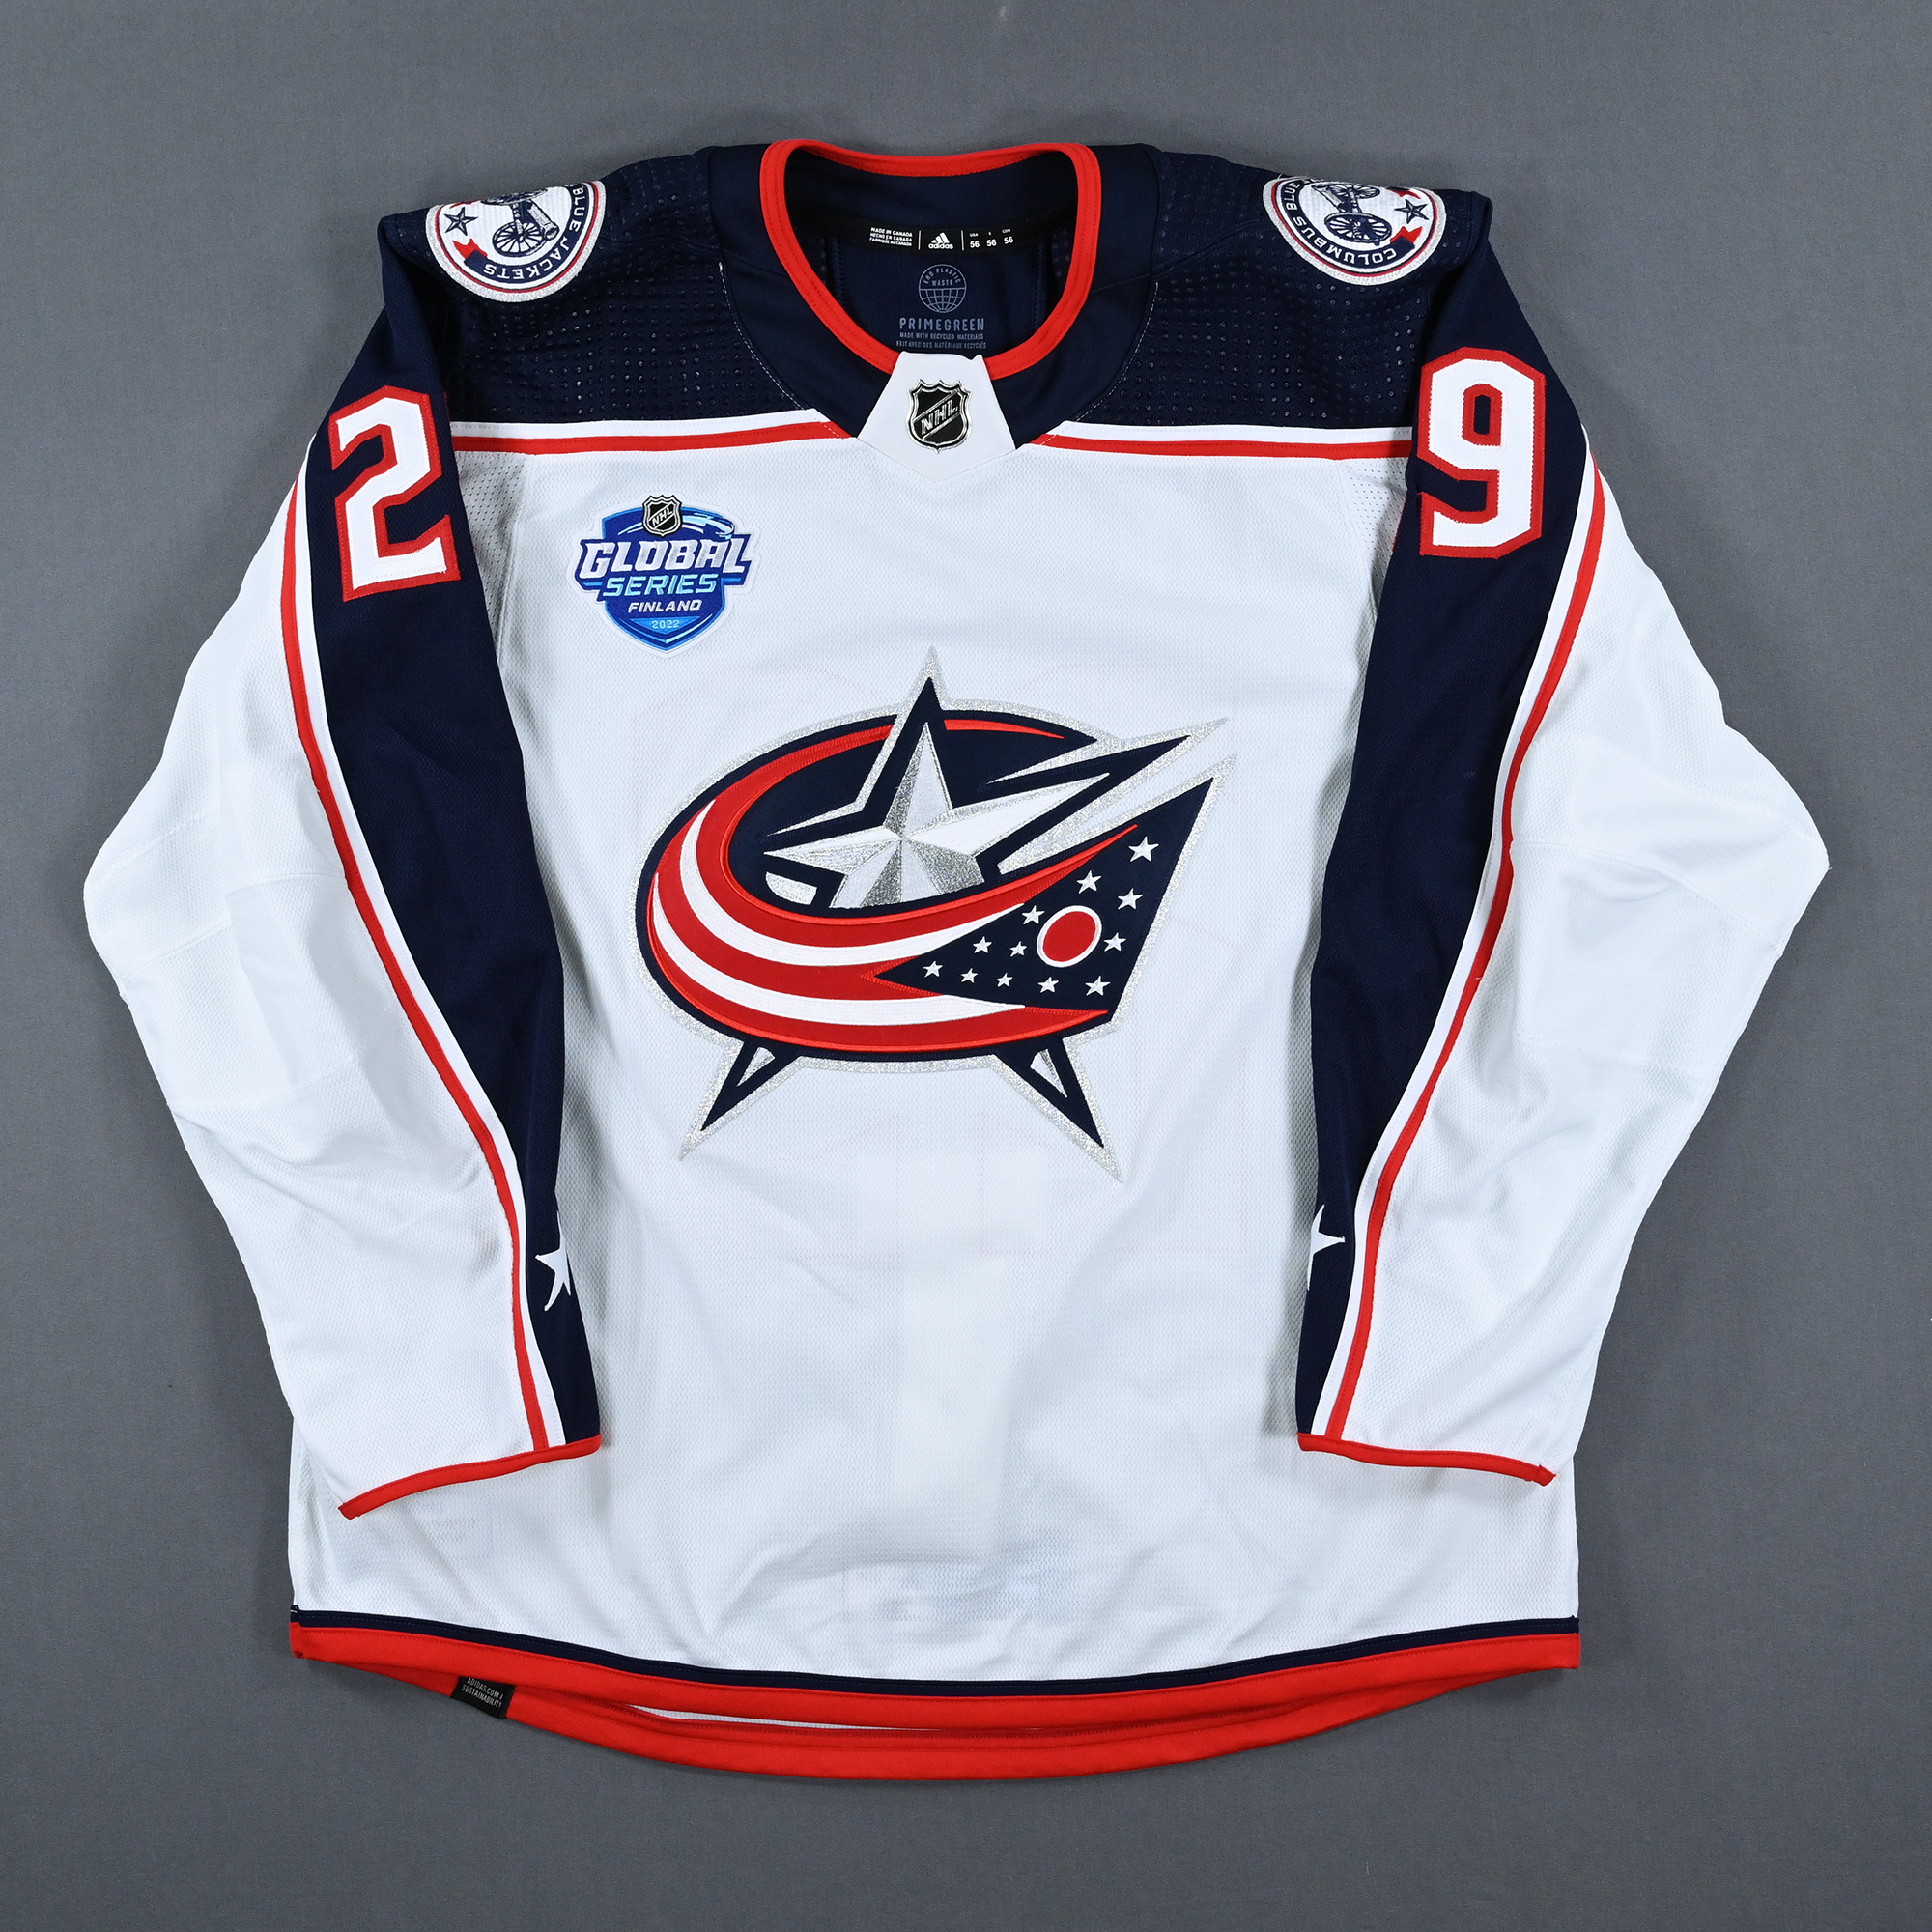 Columbus Blue Jackets Game Used NHL Jerseys for sale